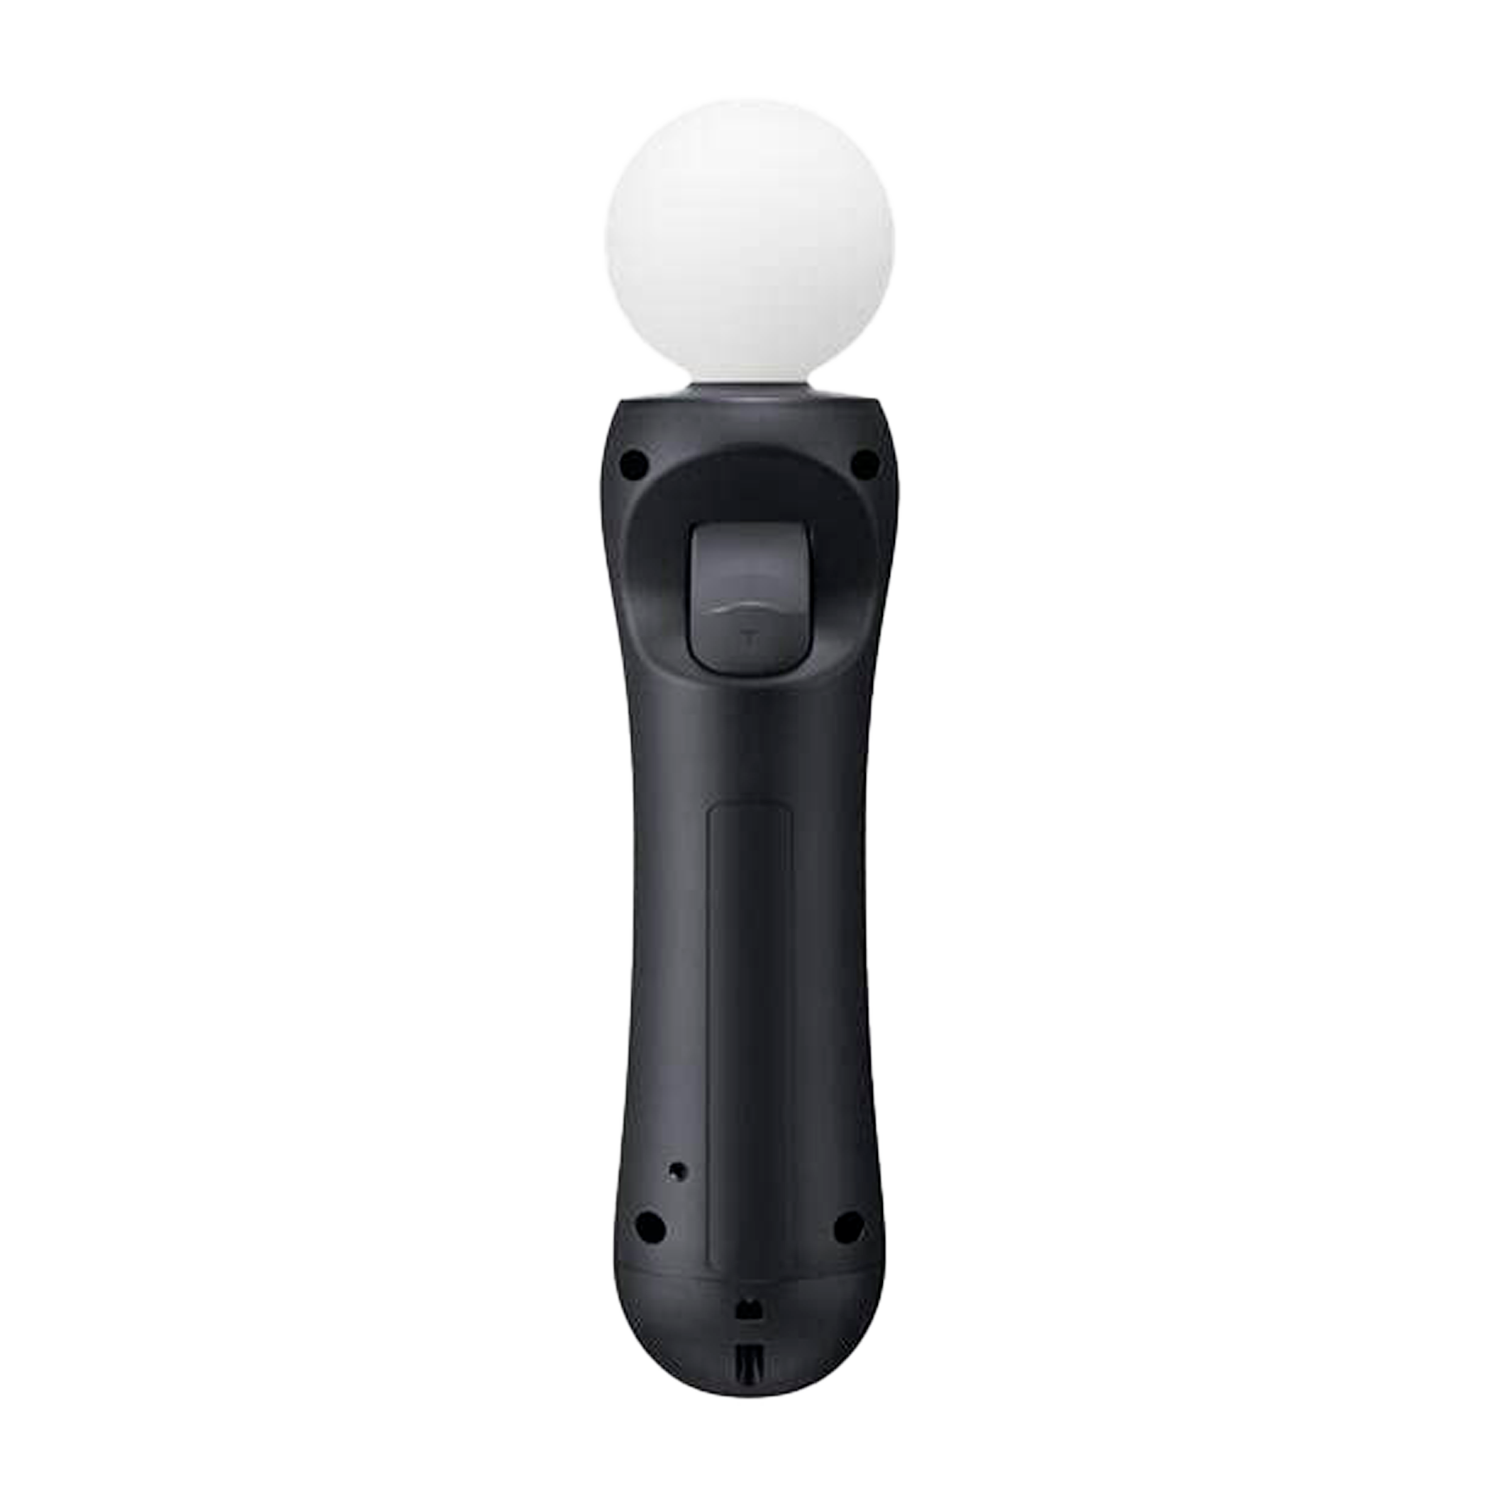 Controle Playstation Move Twin Pack para PS4 e PSVR